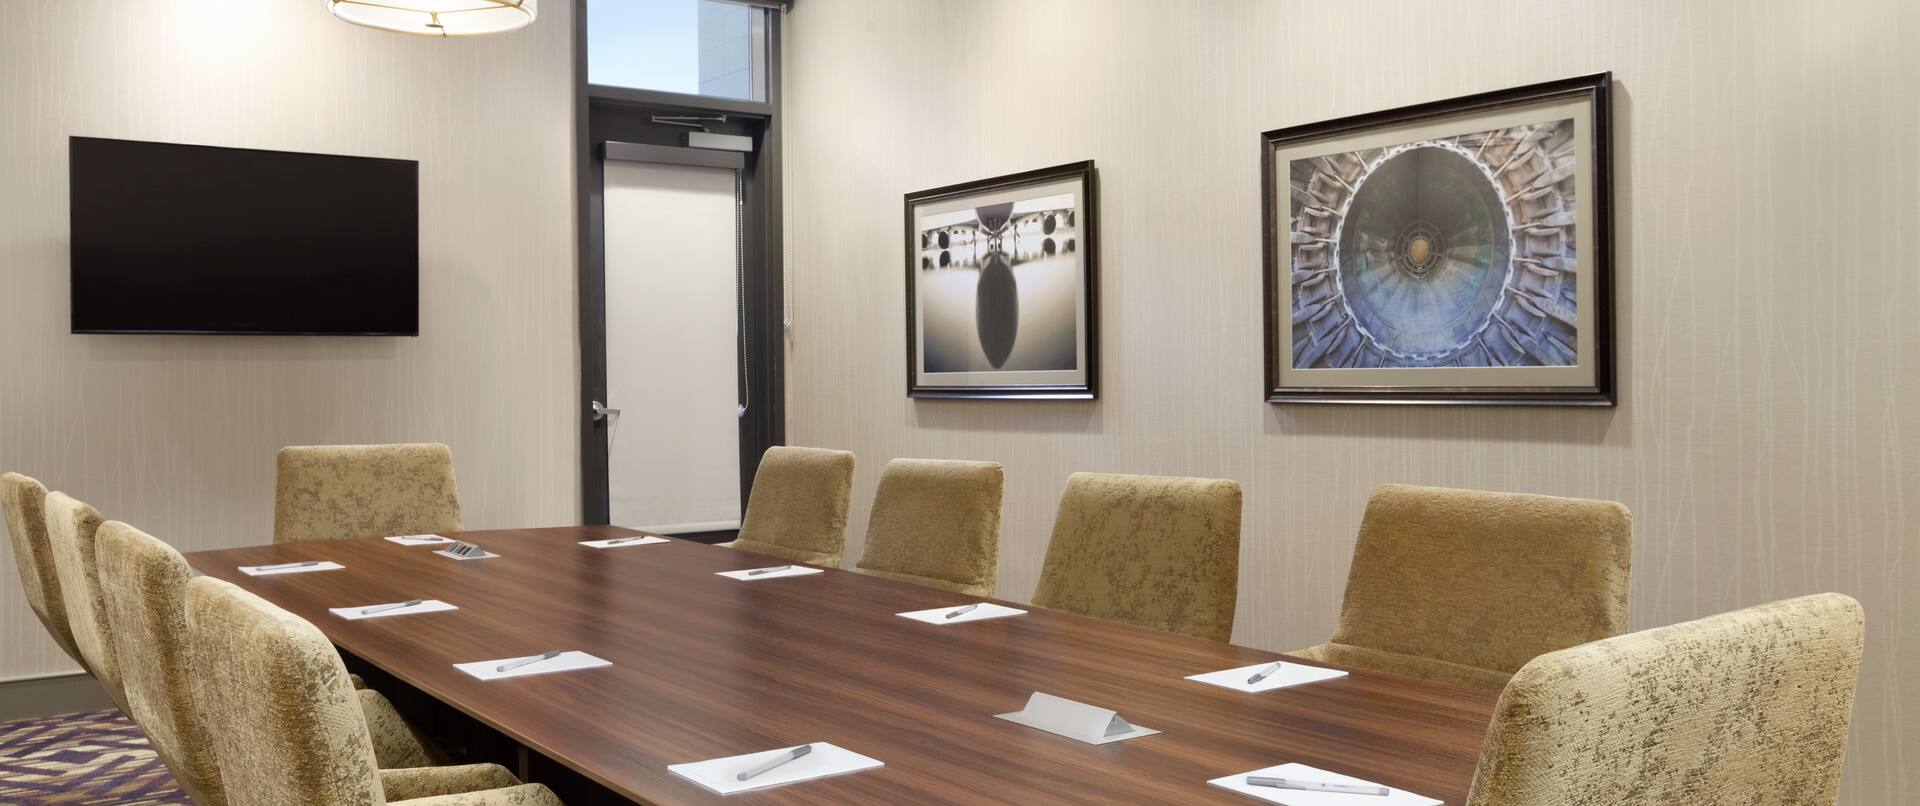 Boardroom with Table, Chairs and Wall Mounted HDTV